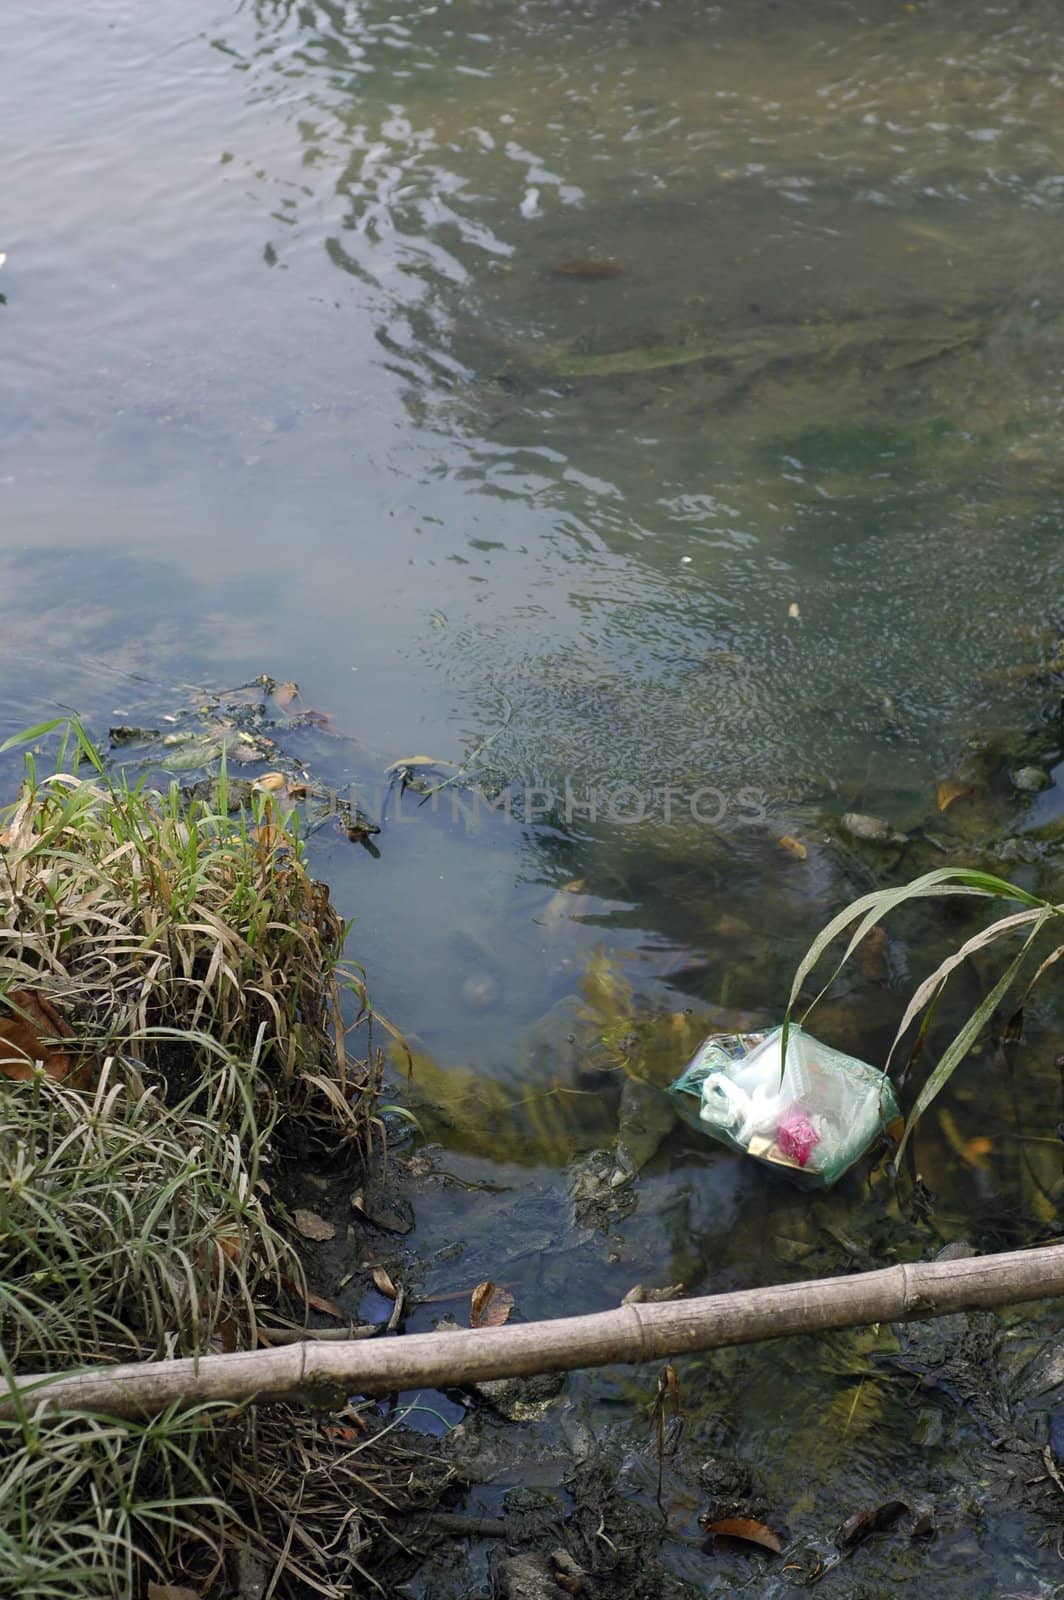 Dirty river pollution with plastic bag and toxic waste. Please care for the environment